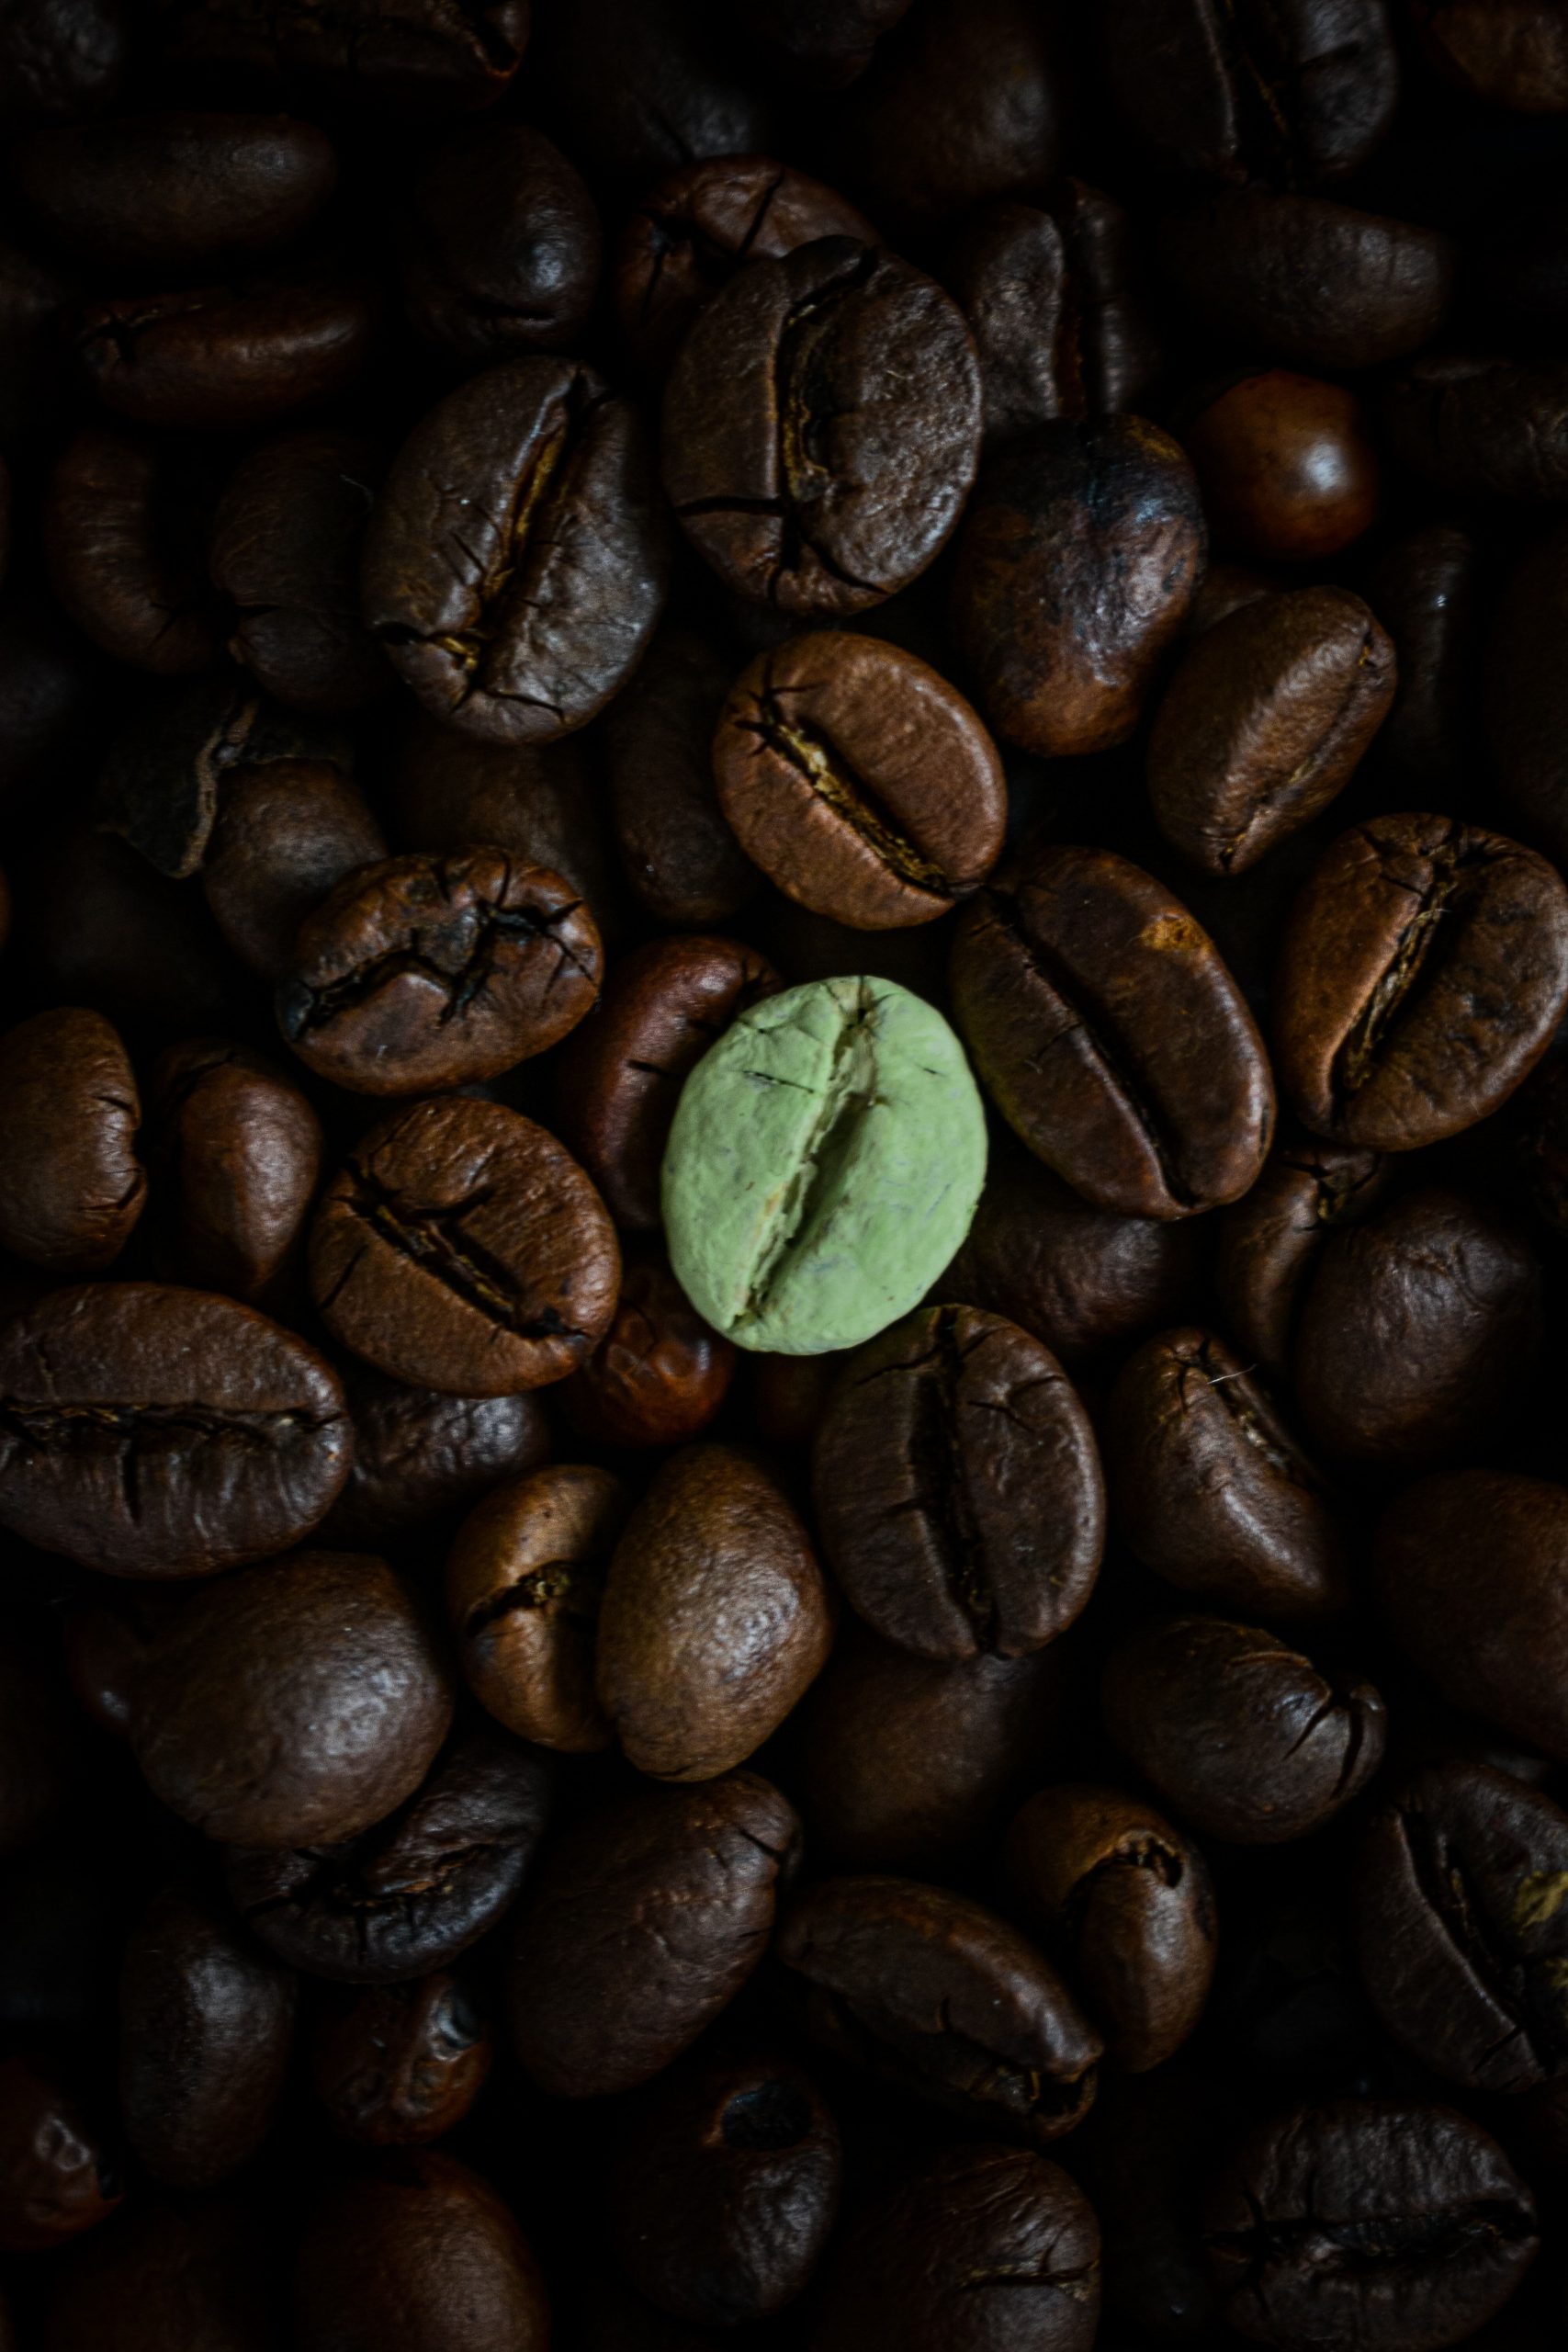 Artificial Intelligence could soon determine quality of coffee